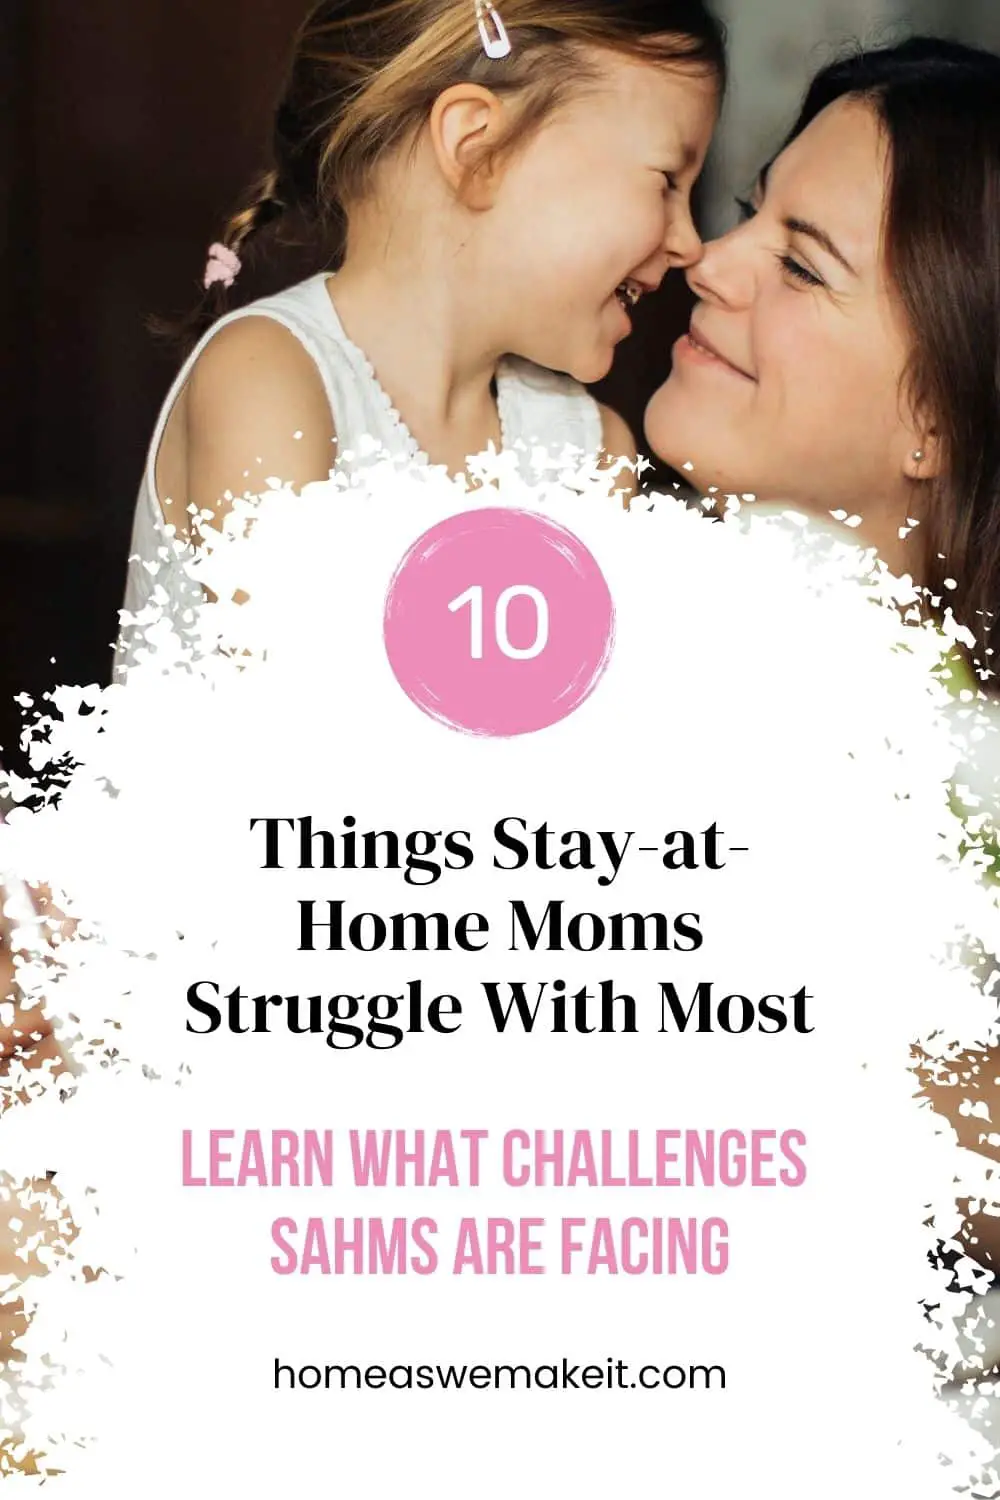 10 Things Stay-At-Home Moms Struggle With Most